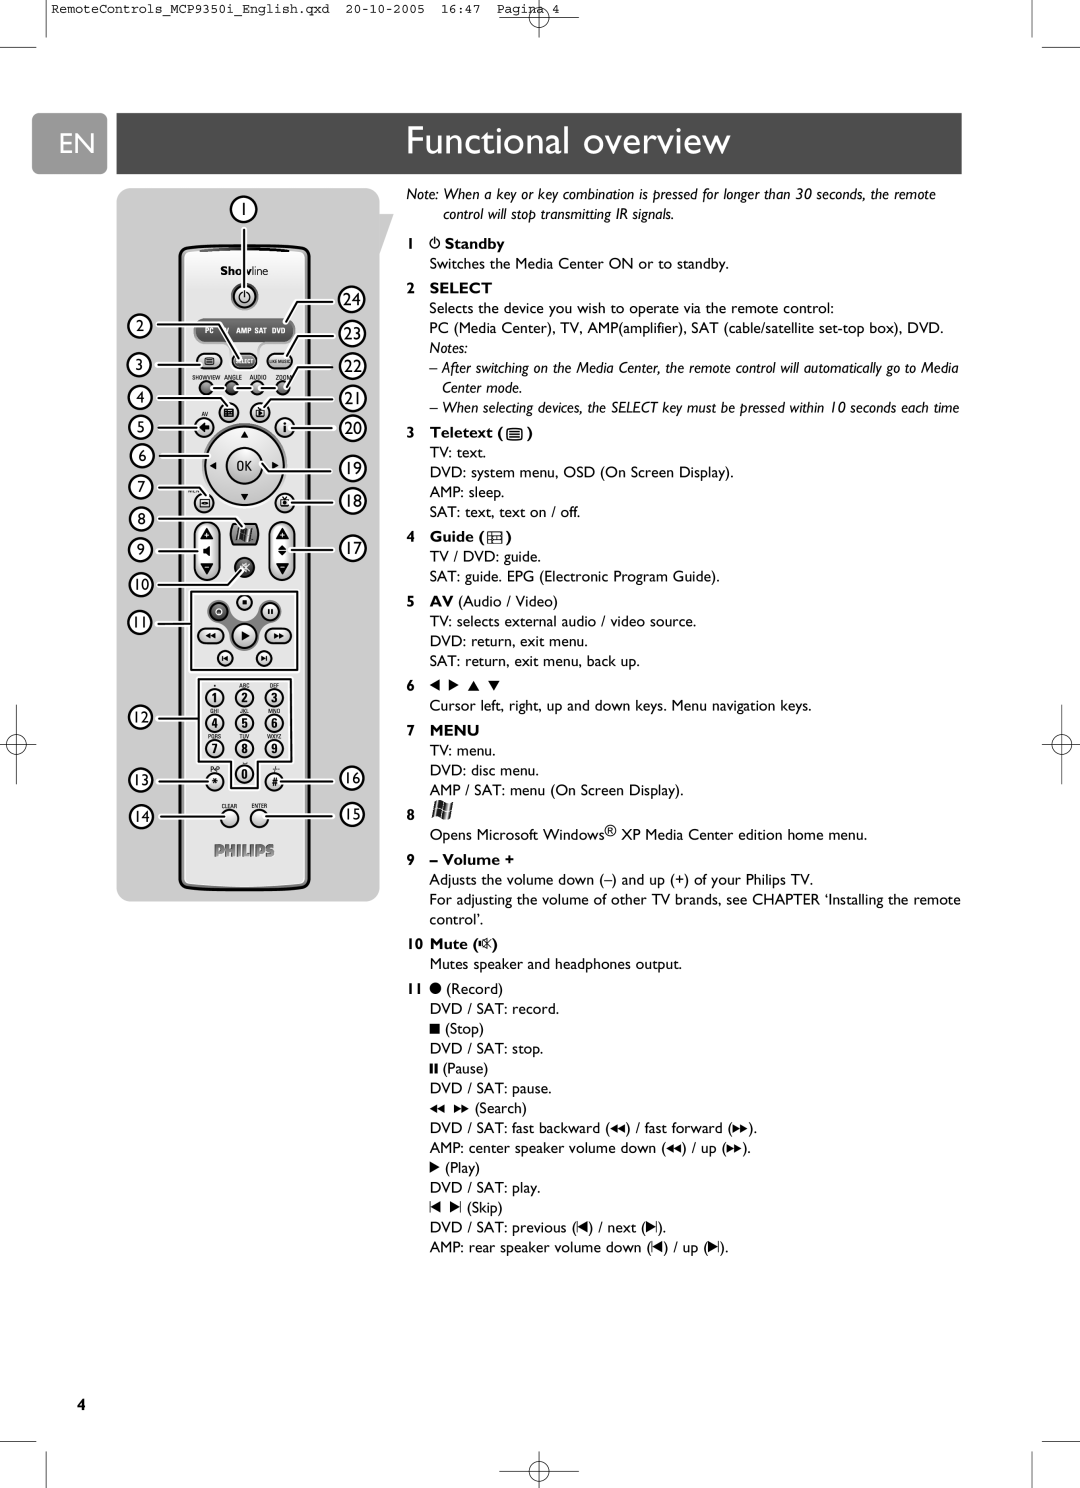 Philips RC4370 user manual Functional overview 